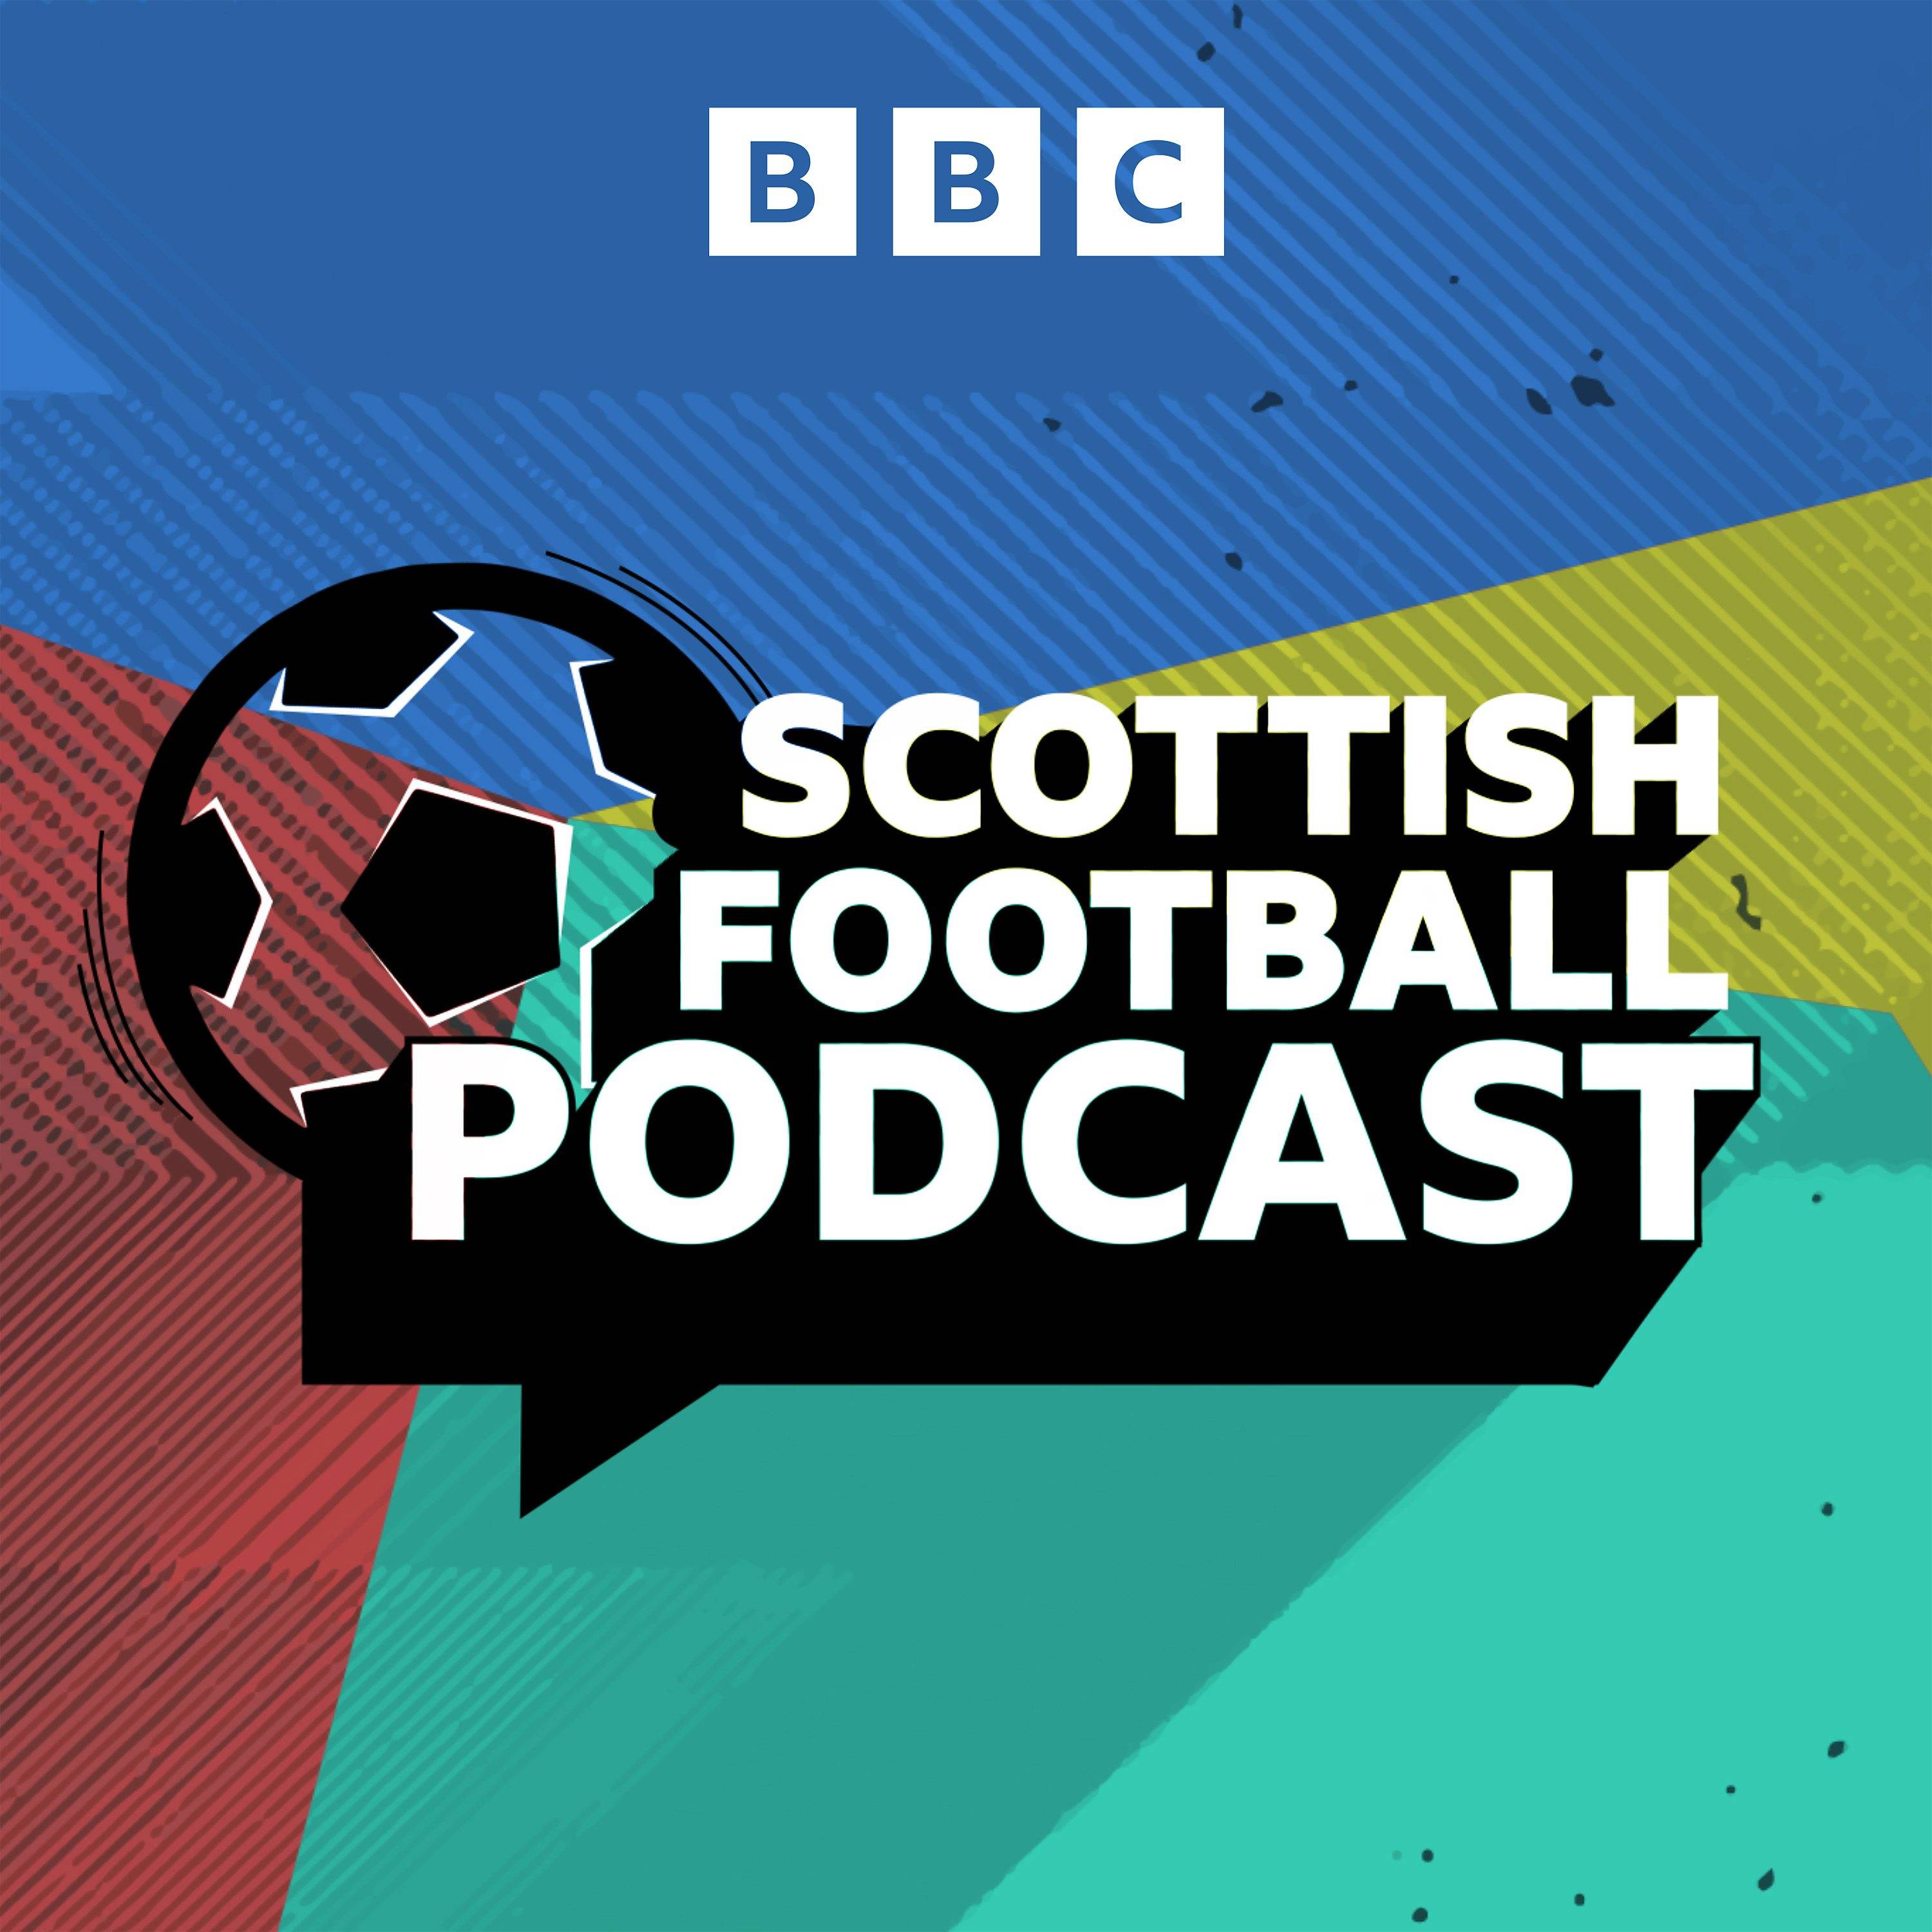 Reaction and analysis of a full card of games in the Scottish Premiership